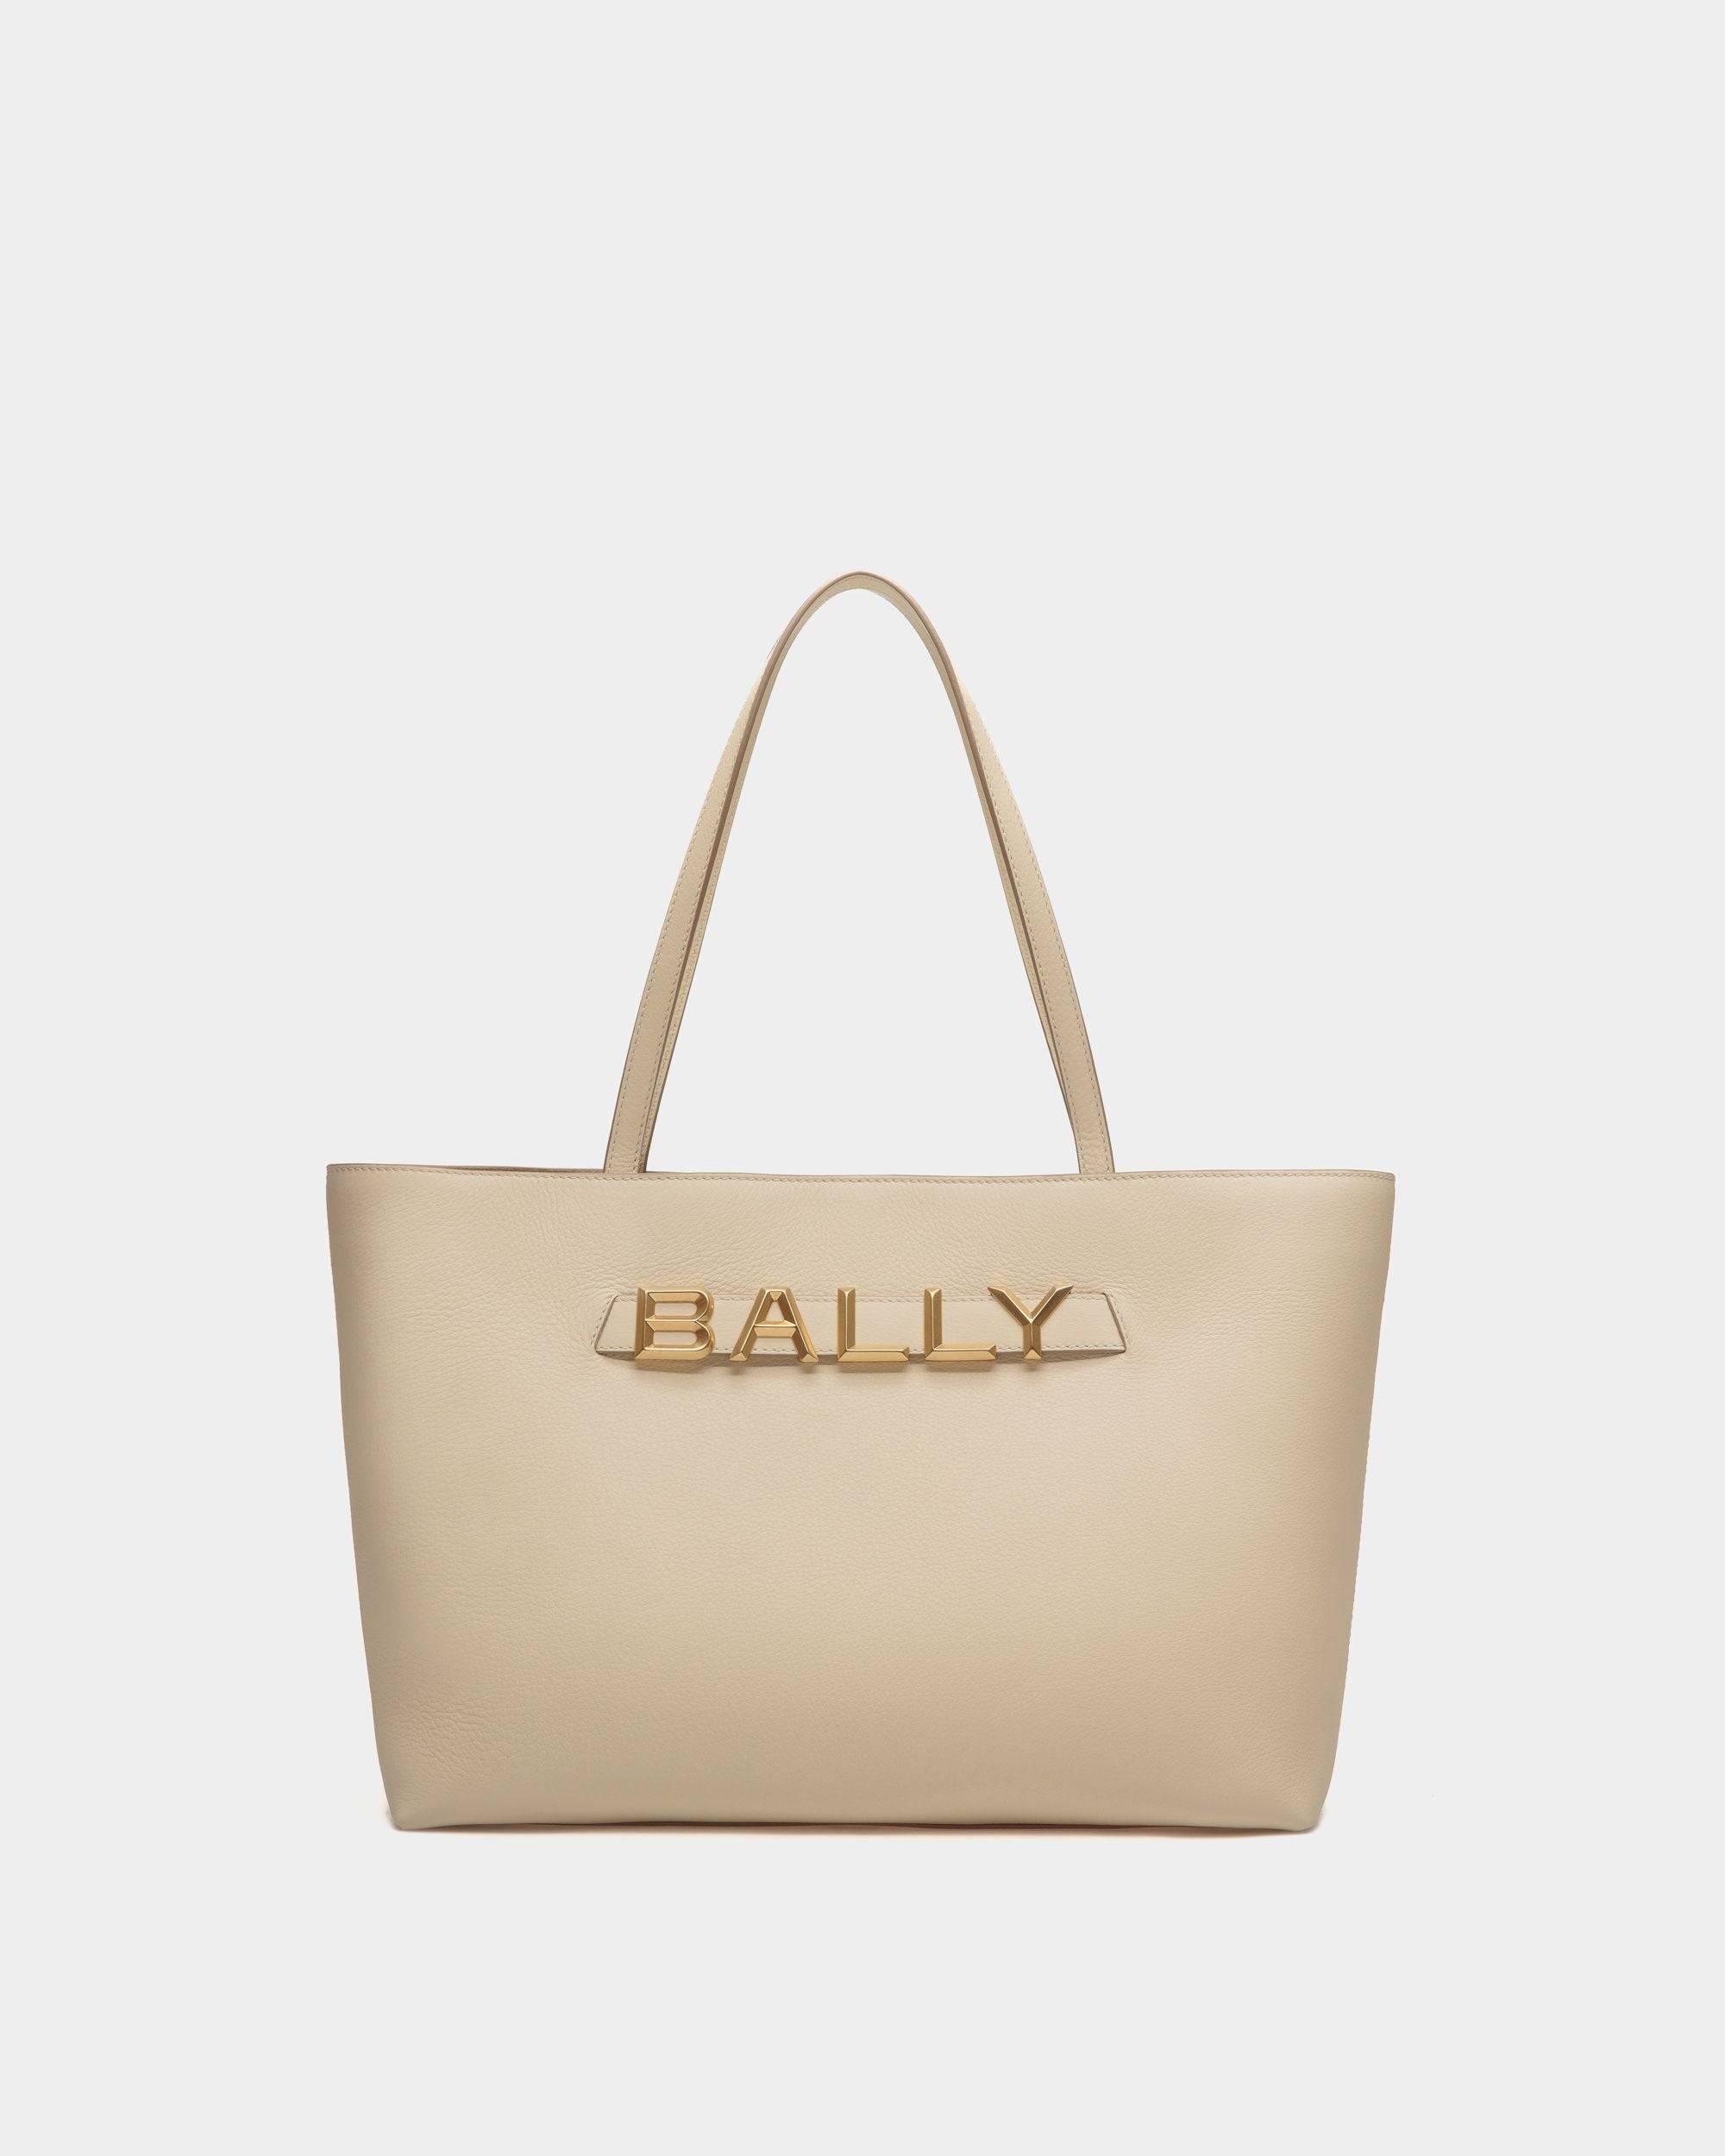 Women's Bally Spell Tote Bag in Leather | Bally | Still Life Front